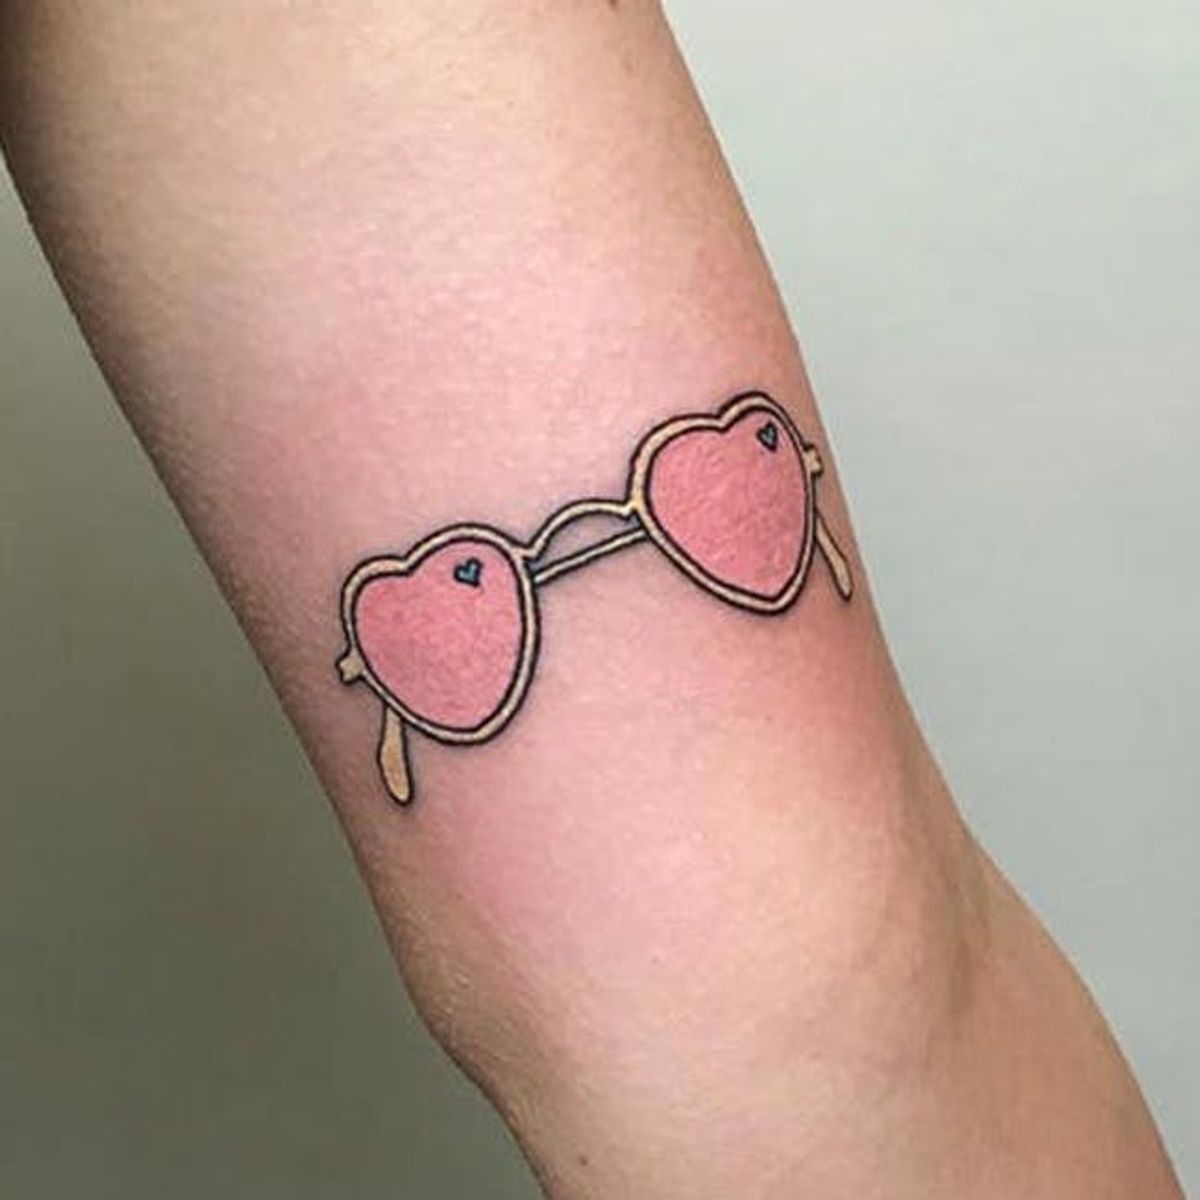 This Portland Tattoo Artist Is Making a Case for Retro Ink